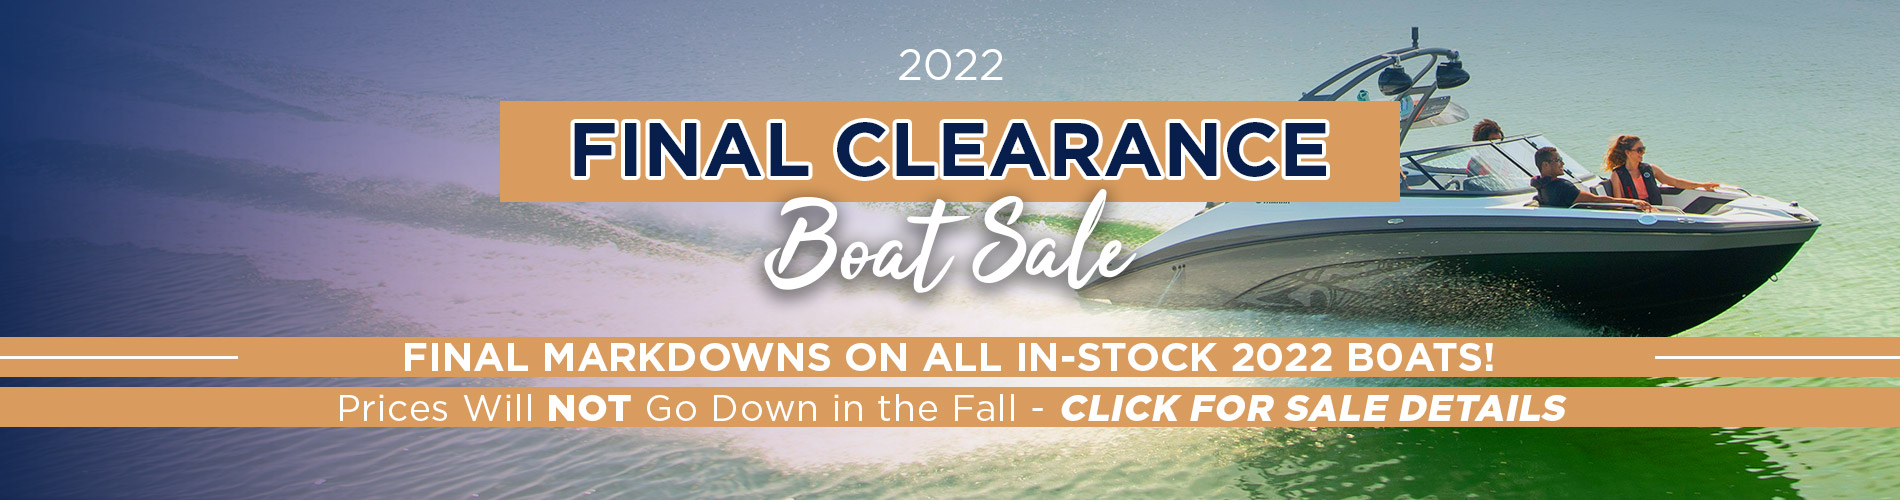 Final Clearance Boat Sale at Buckeye Sports Center in Peninsula! Markdowns on All In-Stock 2022 Boats! - Over 170+ New & Used Boats In-Stock - Click For Sale Details